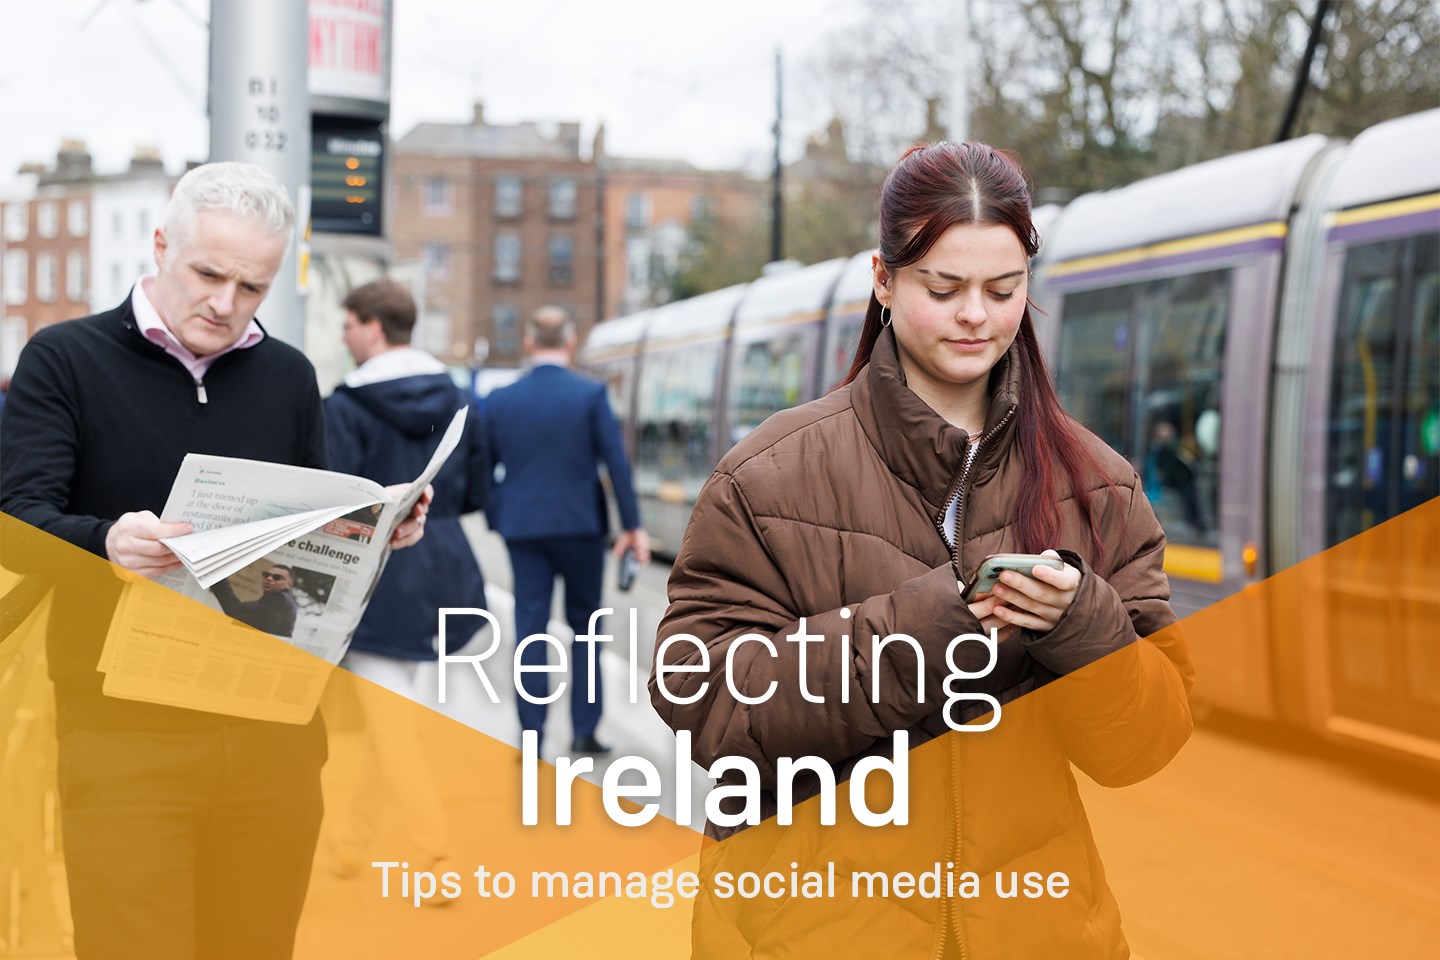 People waiting on Luas in Dublin, one man reading a paper, woman holding and reading on her phone, text on image ' Reflecting Ireland, Tips on manage social media use'